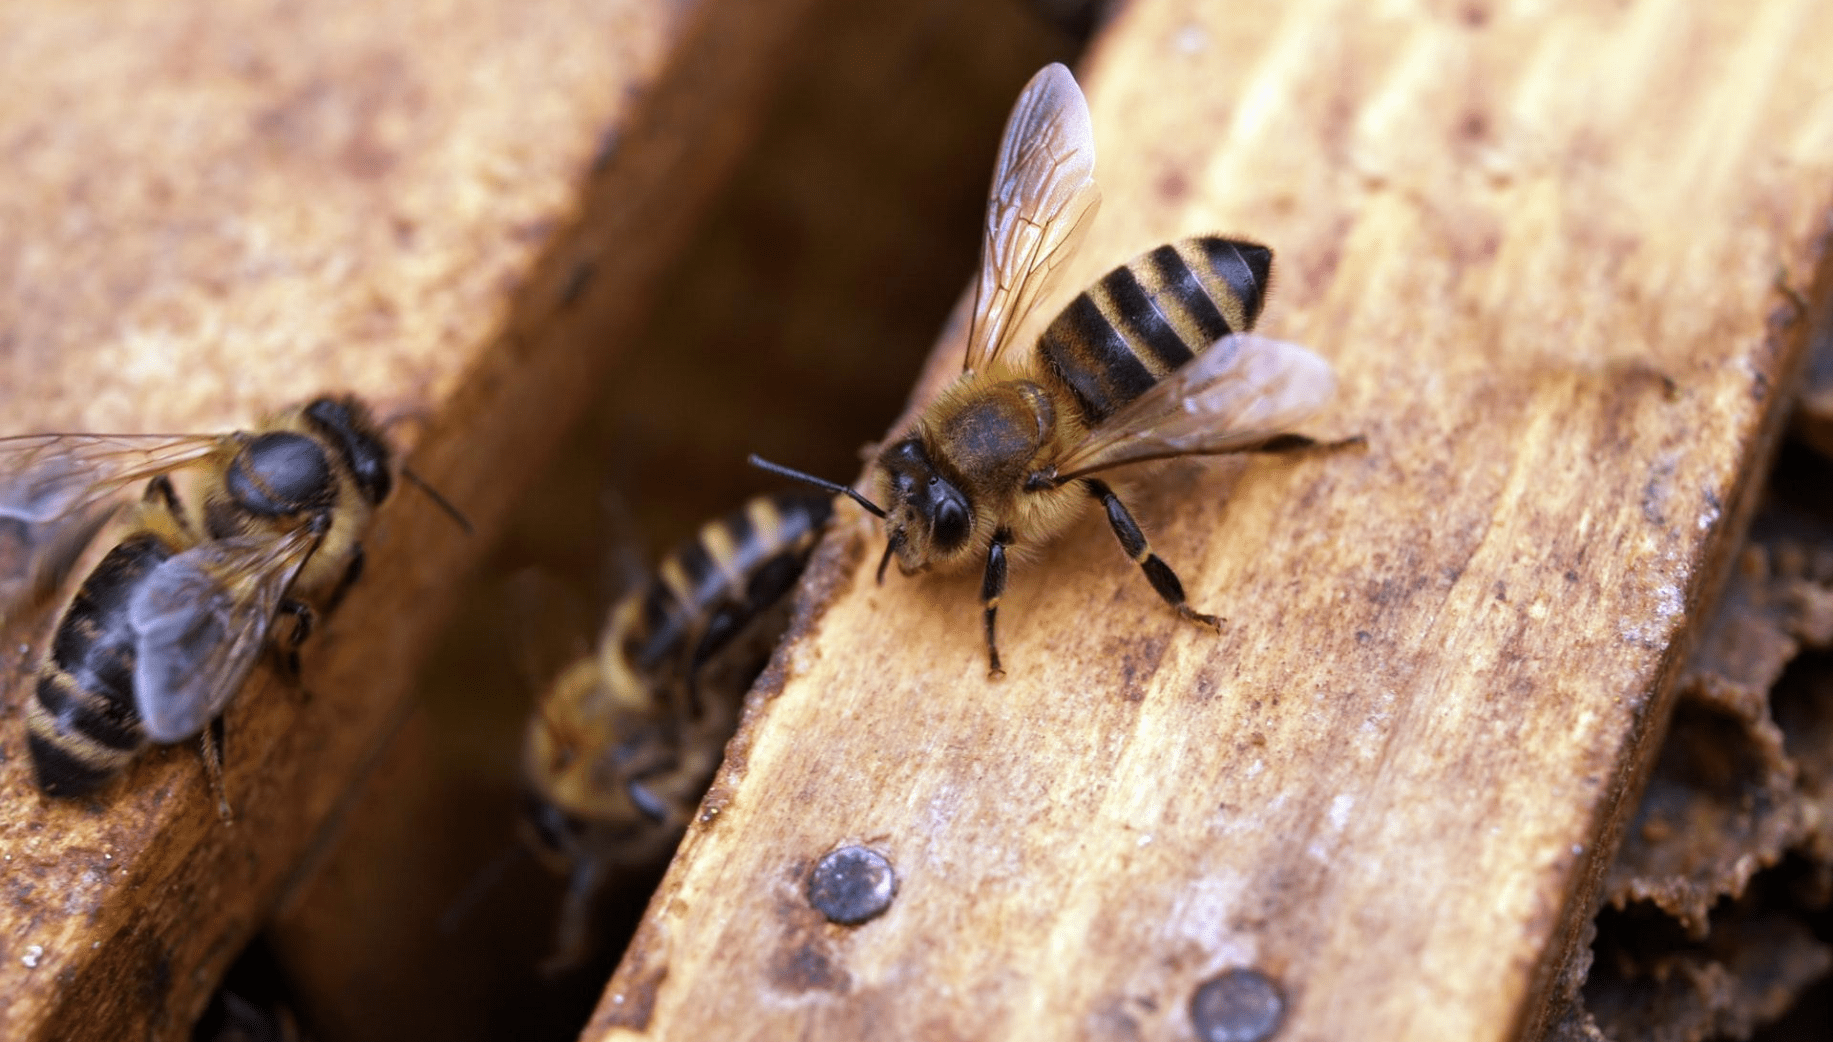 Bees around a Ksing- a traditional beehive used in Meghalaya